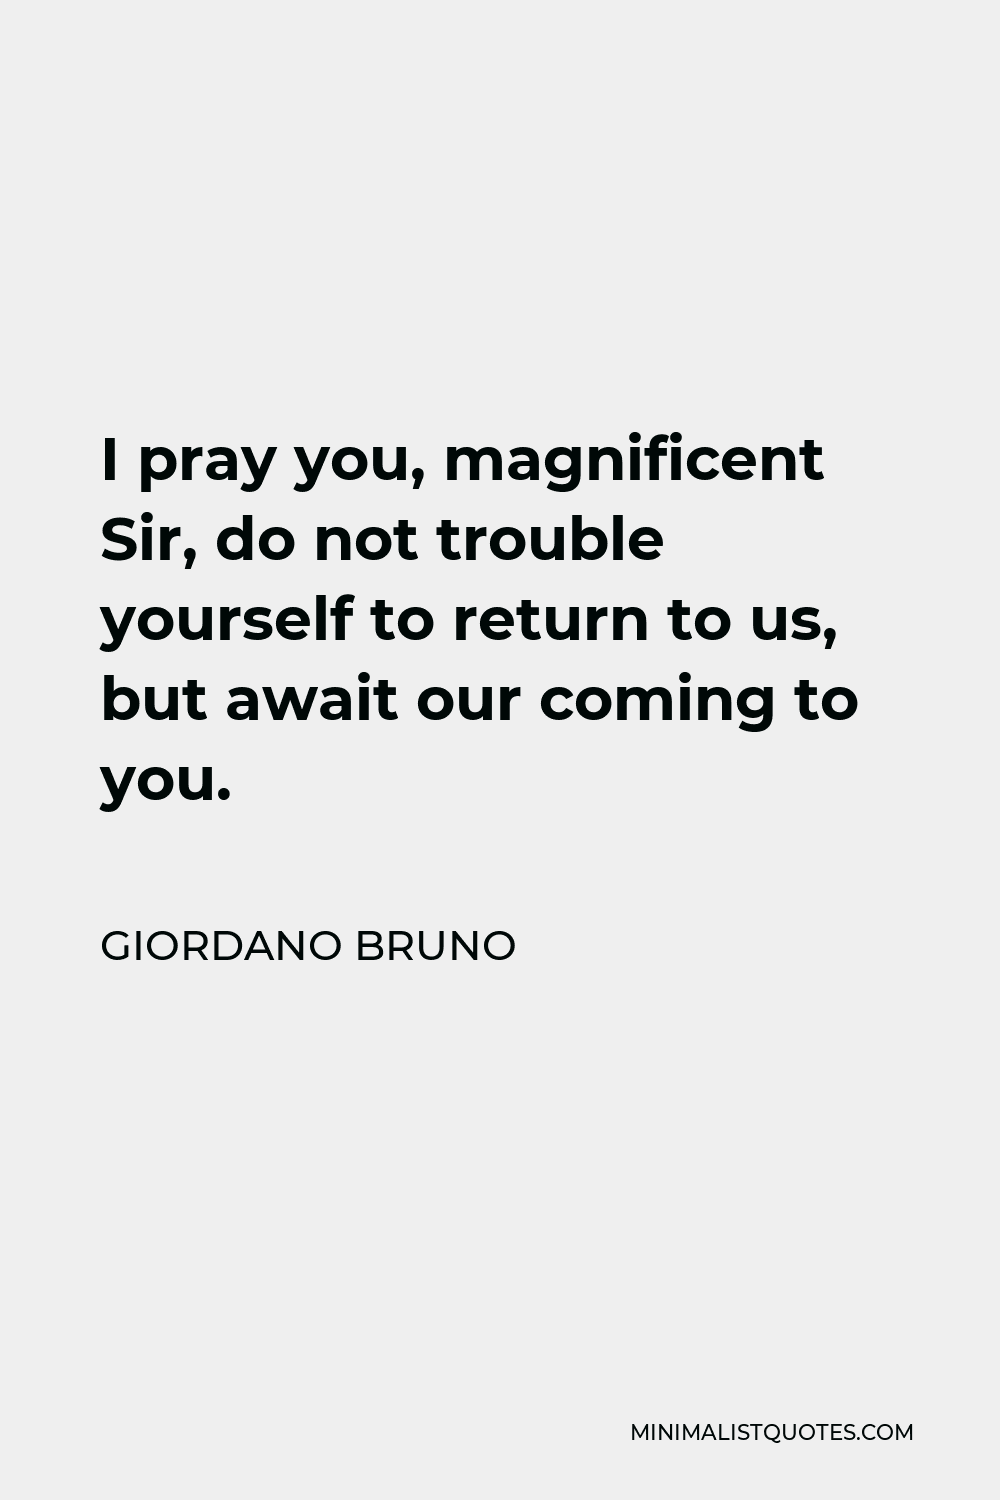 Giordano Bruno Quote - I pray you, magnificent Sir, do not trouble yourself to return to us, but await our coming to you.